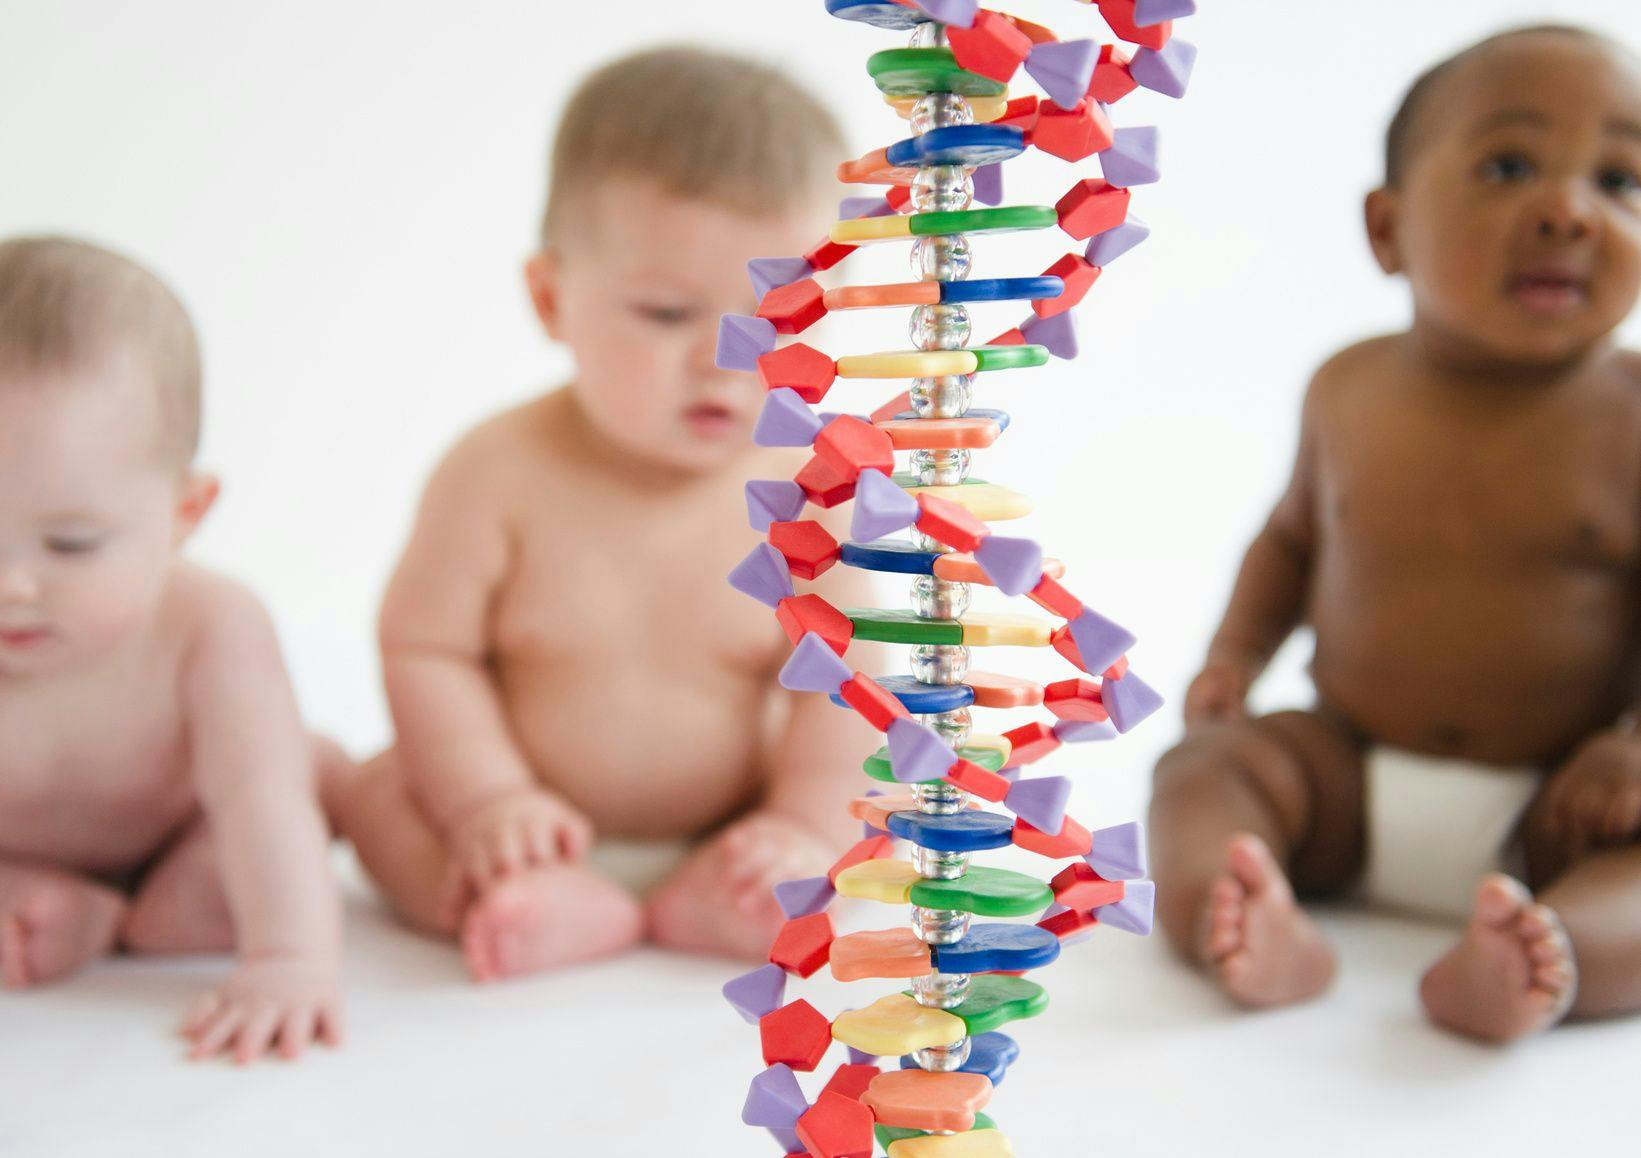 WGS Twice as Effective as Targeted Gene Sequencing In Detecting Infant Genetic Disorders